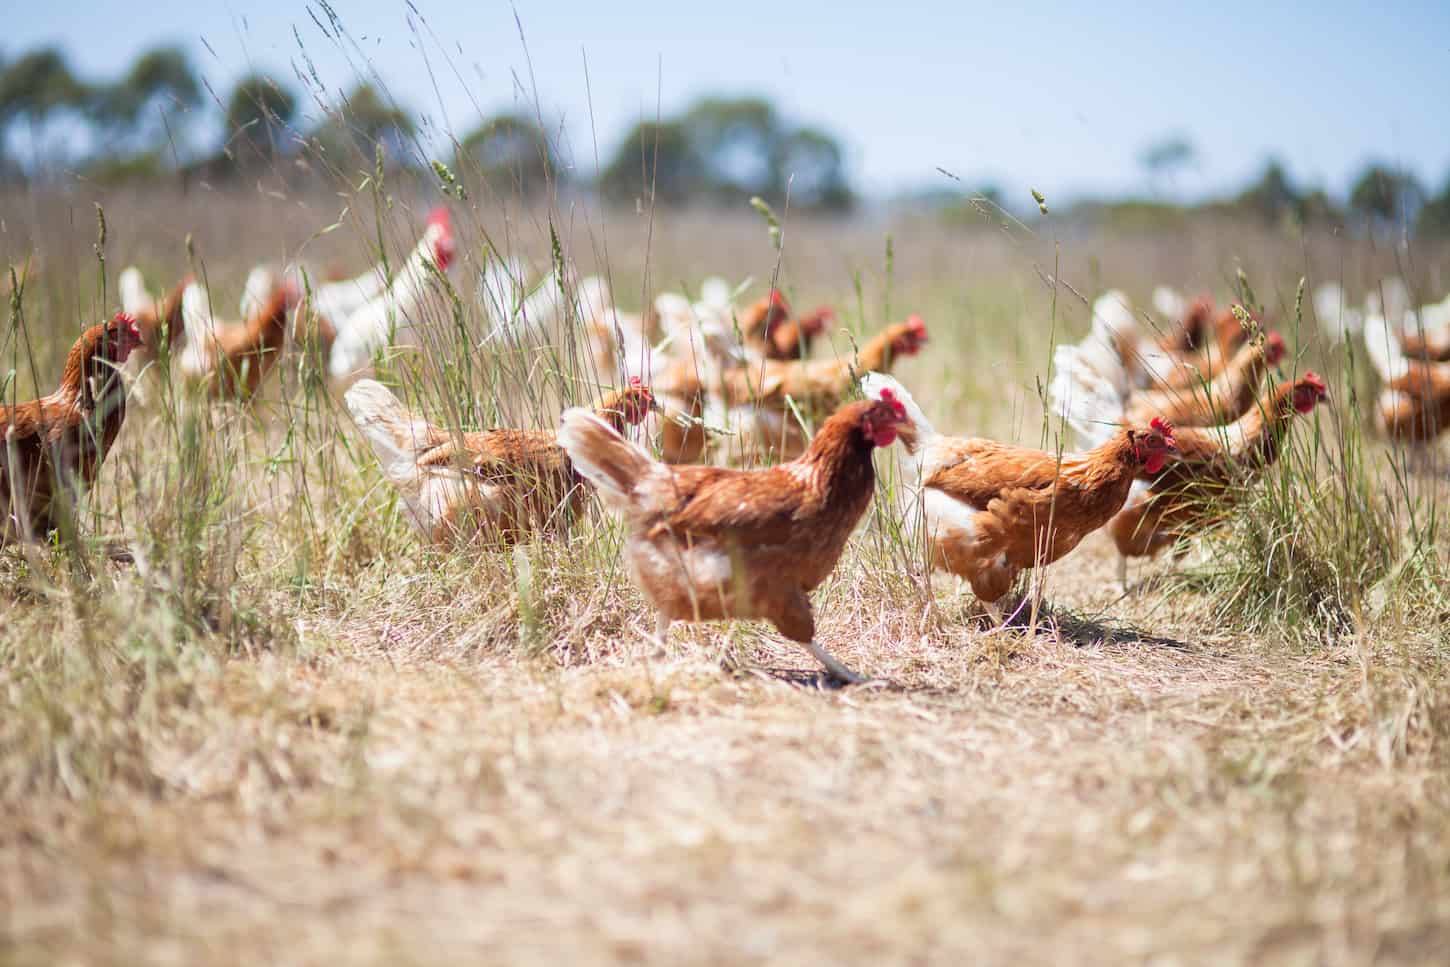 An image of free-range chickens roaming around the farm.